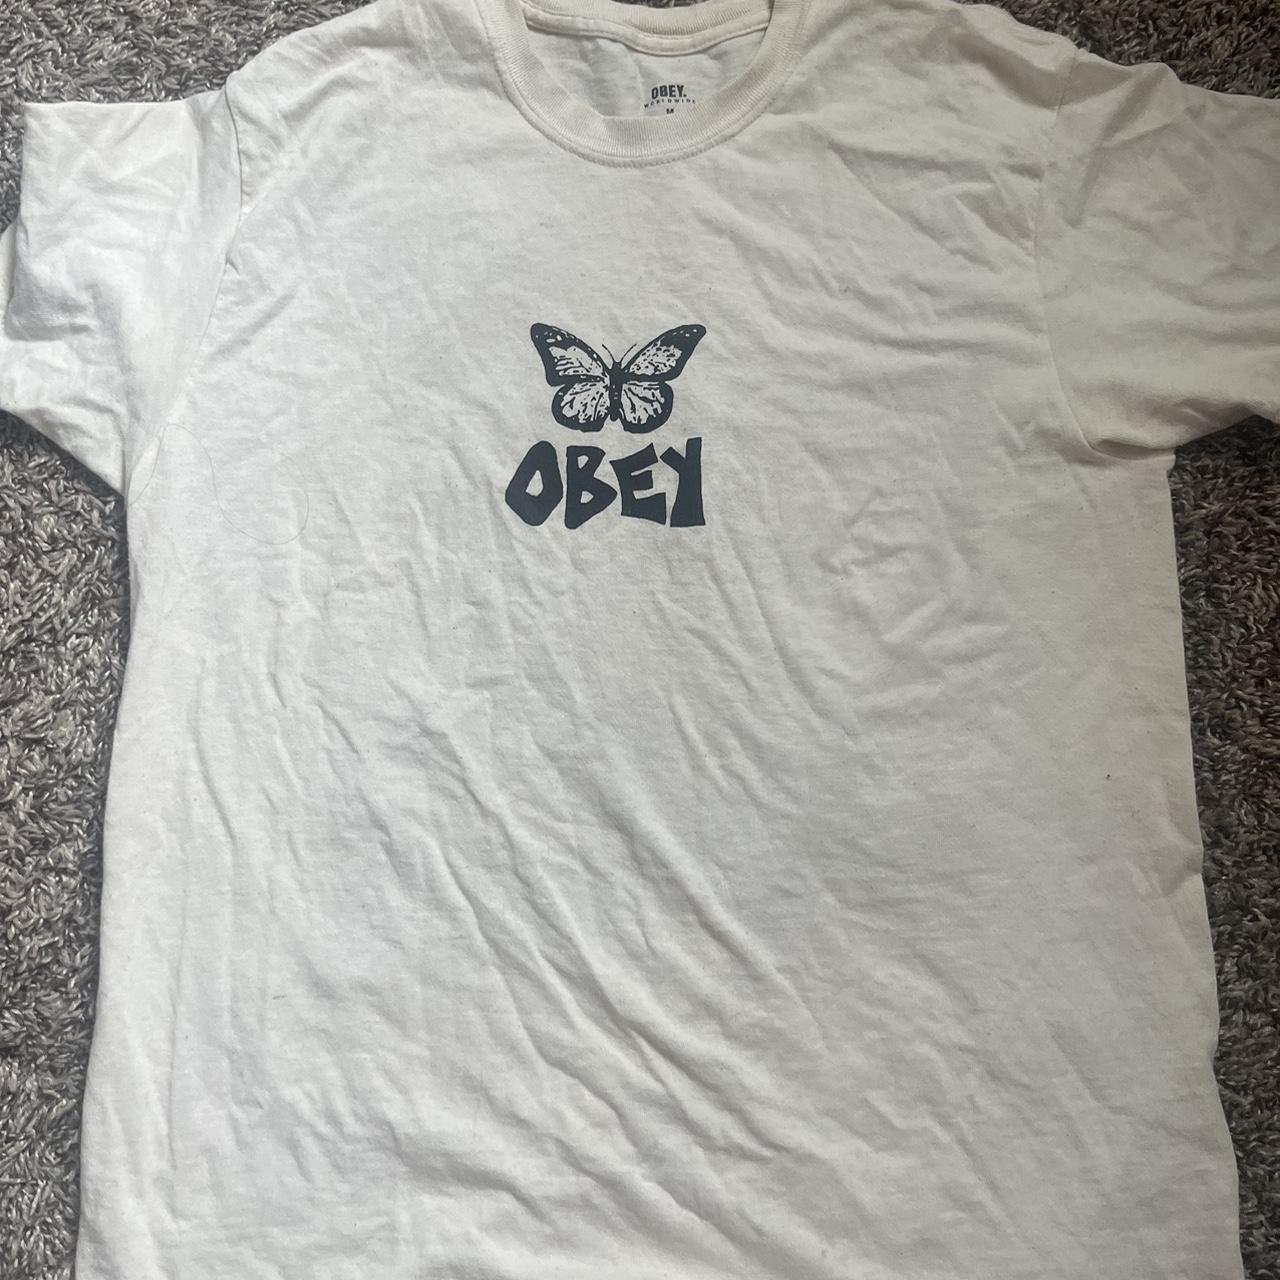 Obey Men's Cream and Tan T-shirt